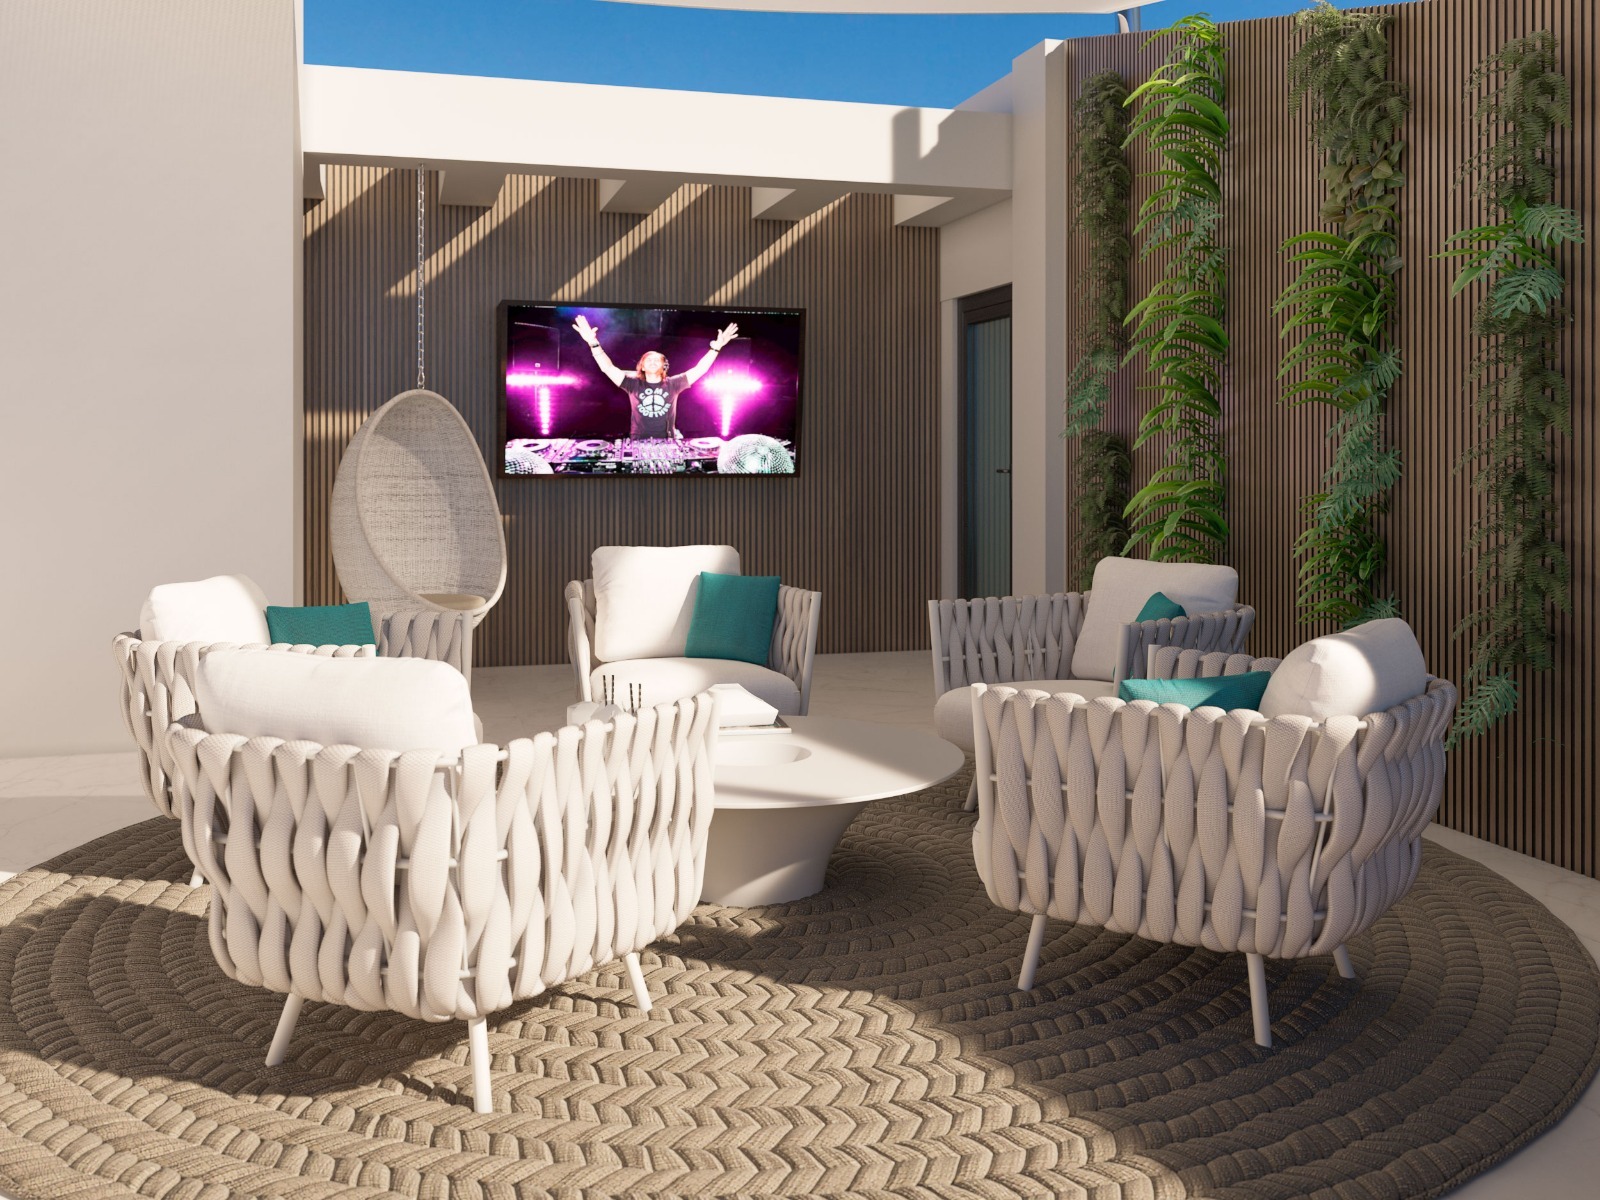 Roof Terrace white brown blue with flatscreen tv and plants on wall - Original Interiors